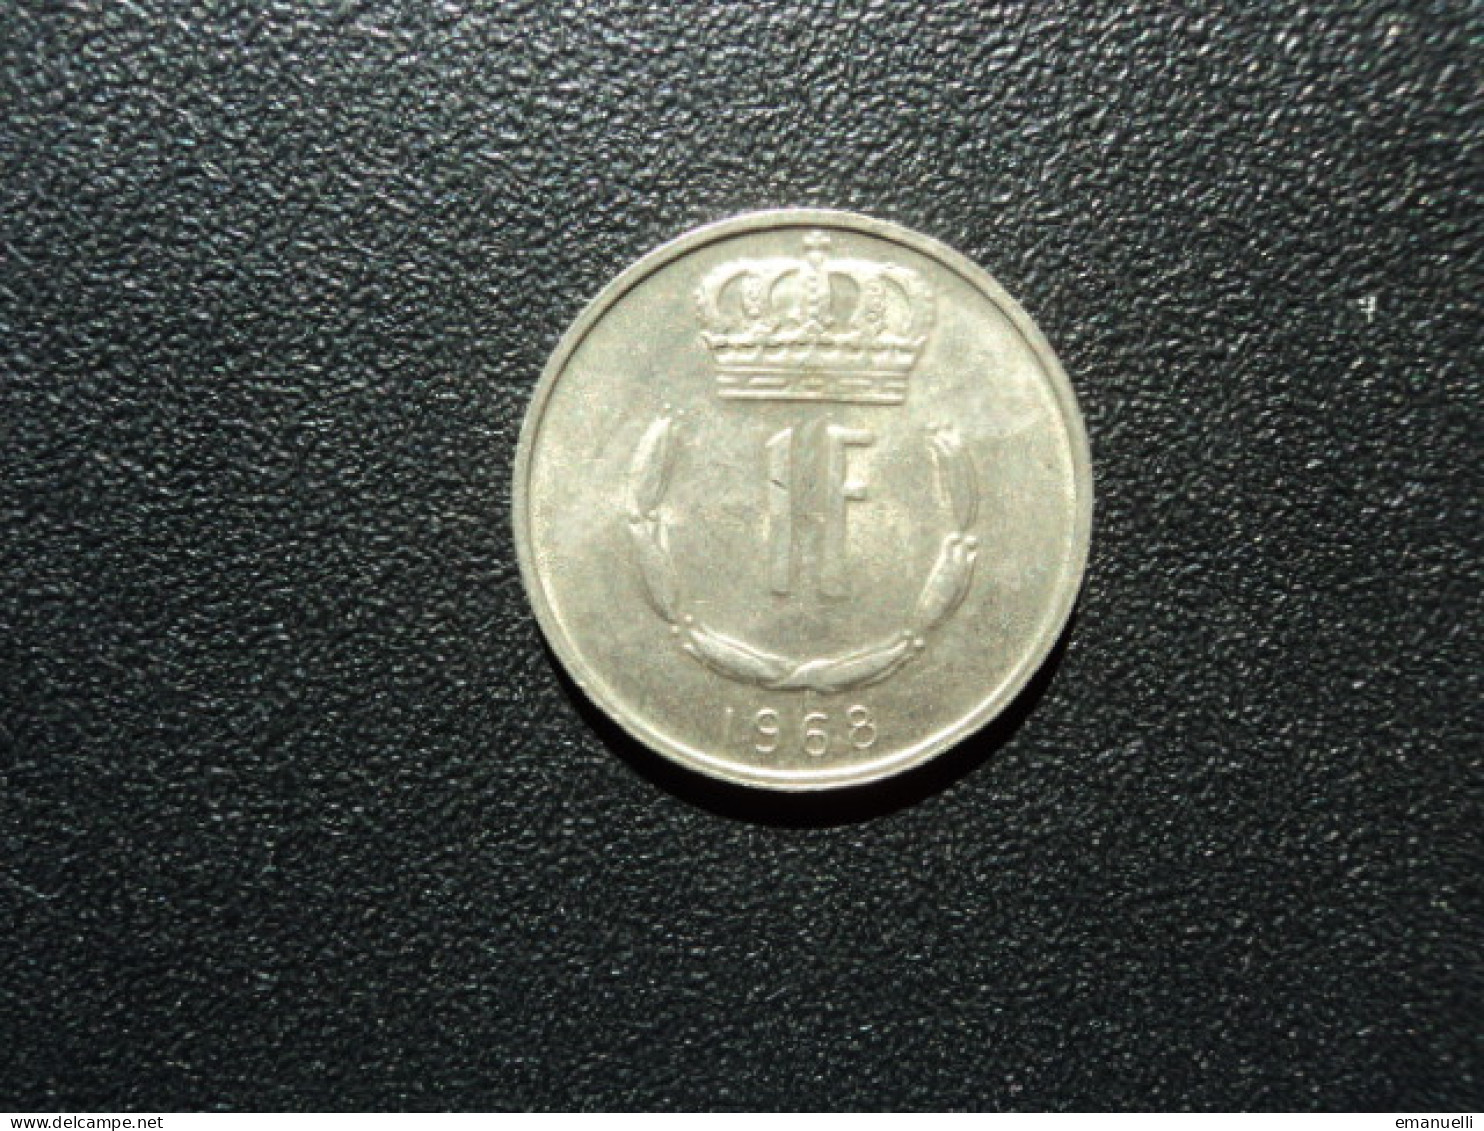 LUXEMBOURG : 1 FRANC  1968   KM 55     SUP * - Luxembourg